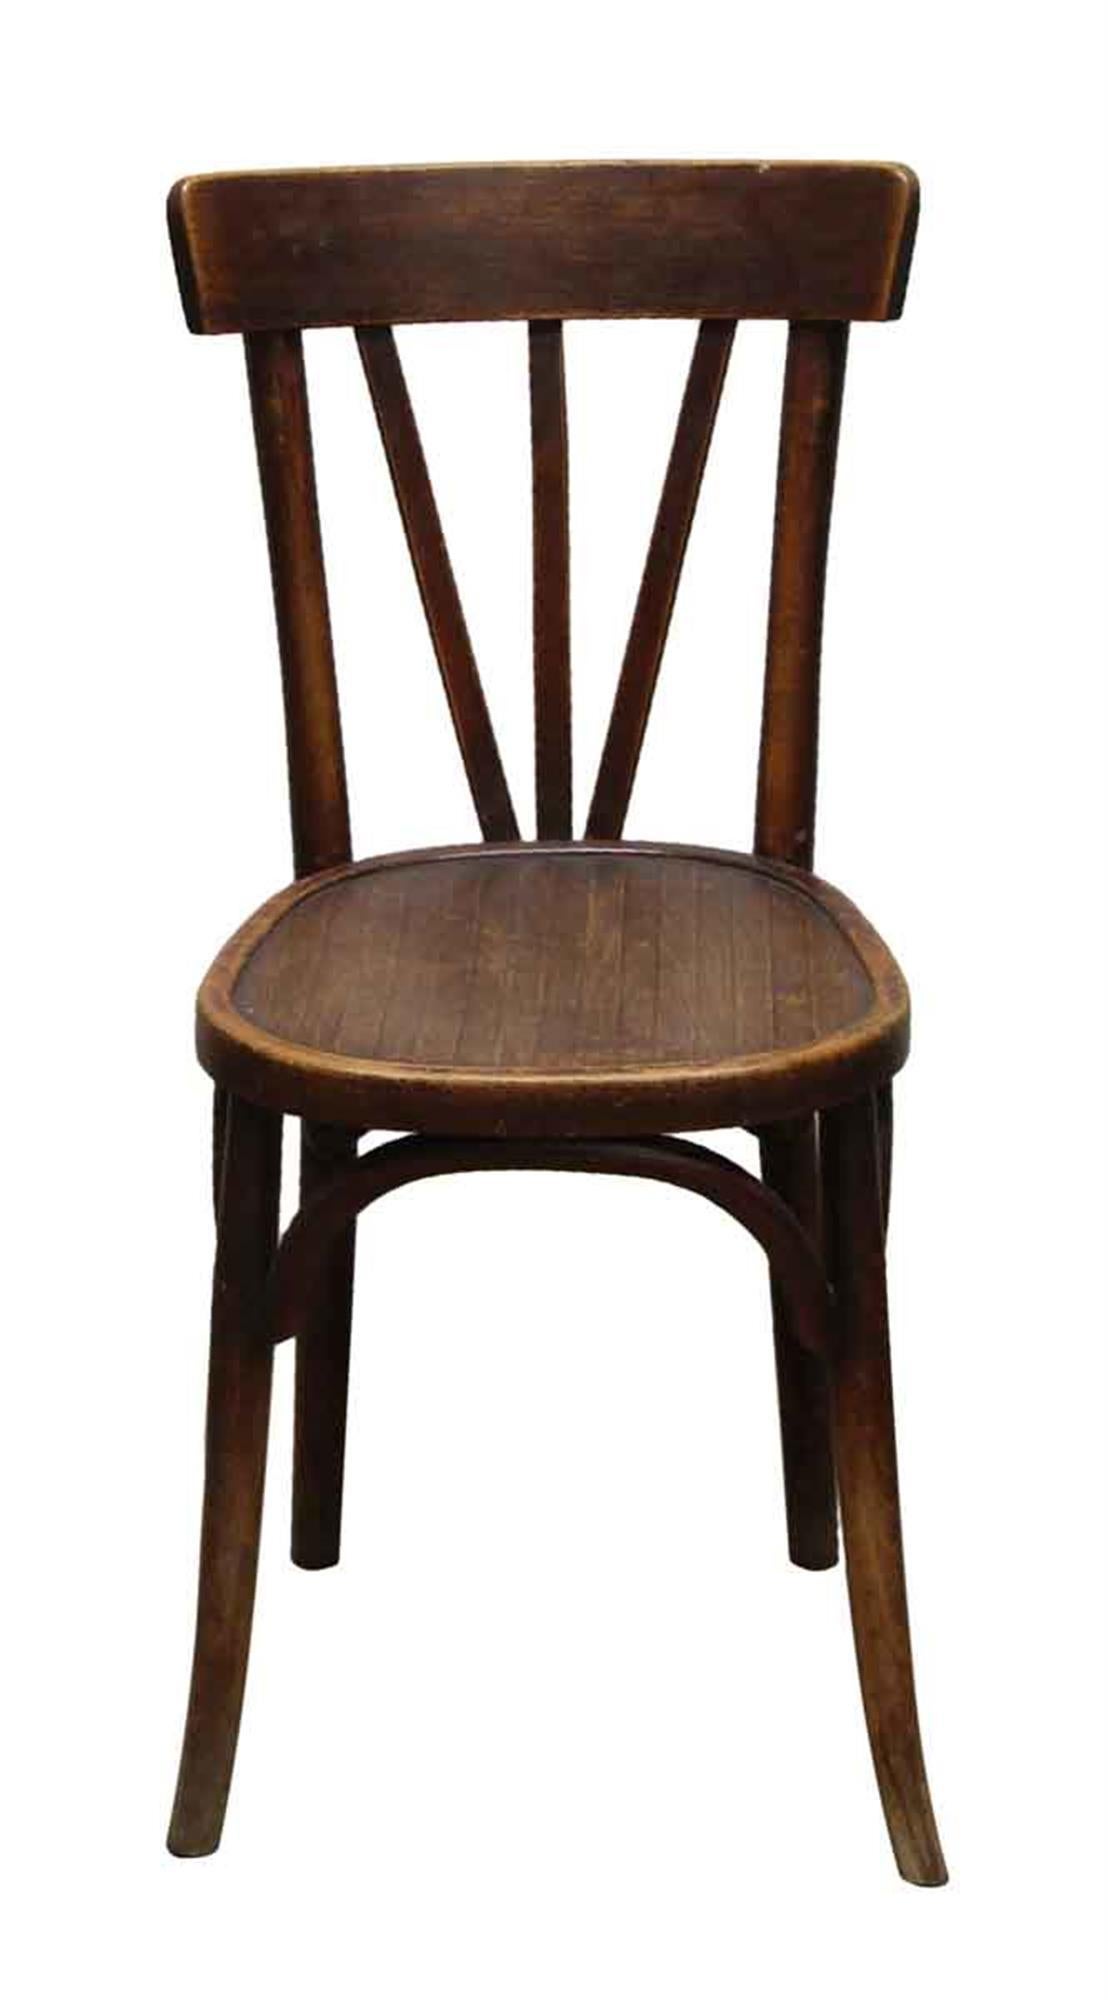 Dark wood tone bistro chairs. Quantity available at time of posting. Priced each. This can be seen at our 5 East 16th St location on Union Square in Manhattan.